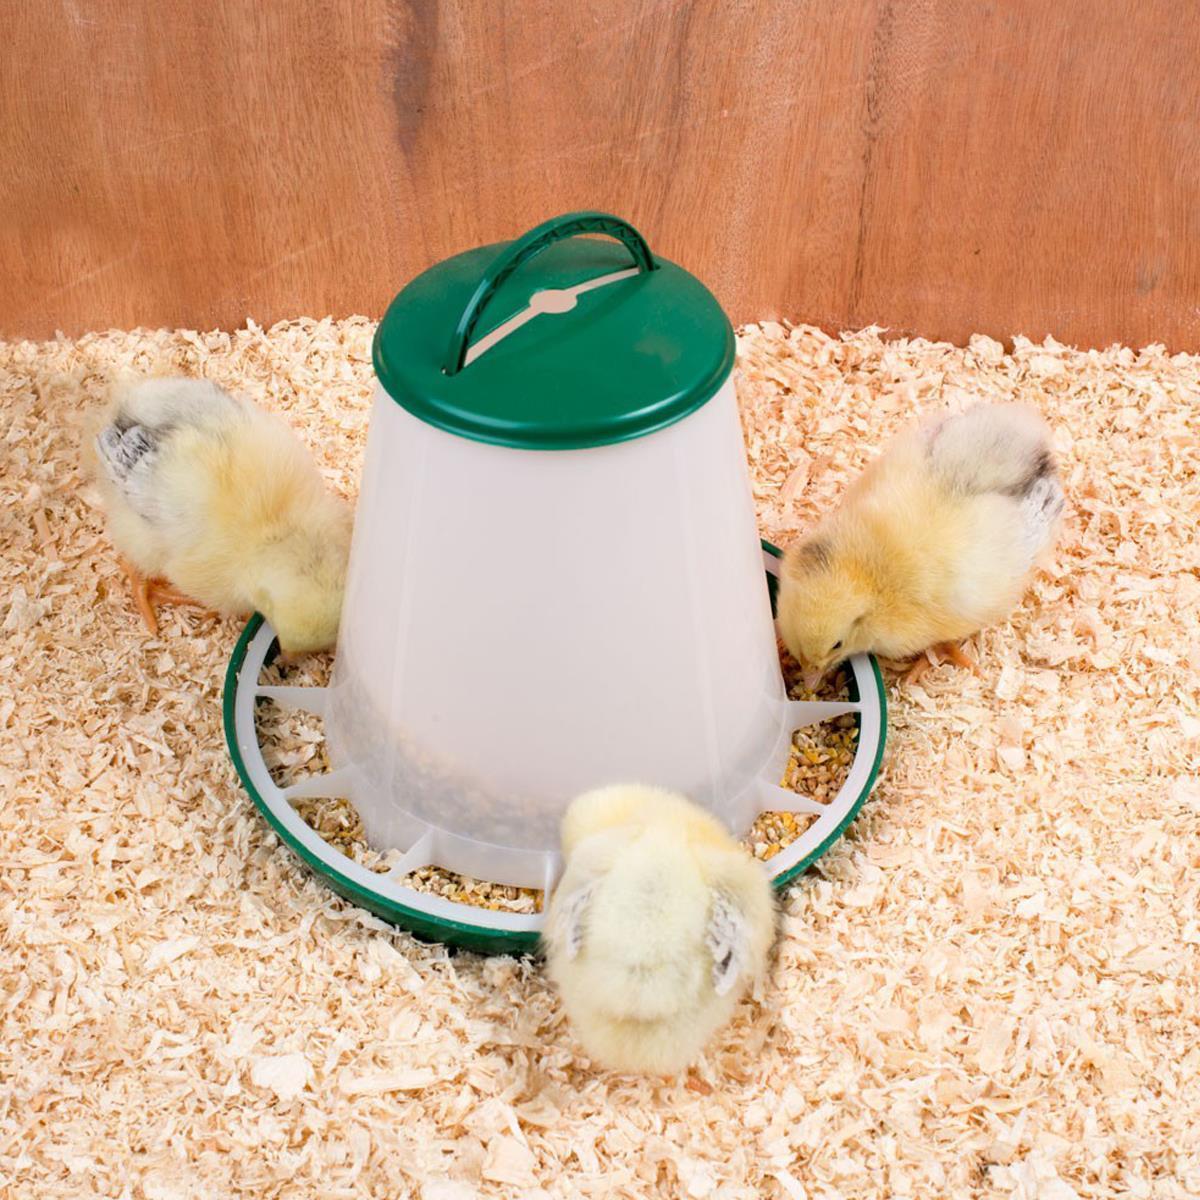 Poultry feeder with green lid 1 kg